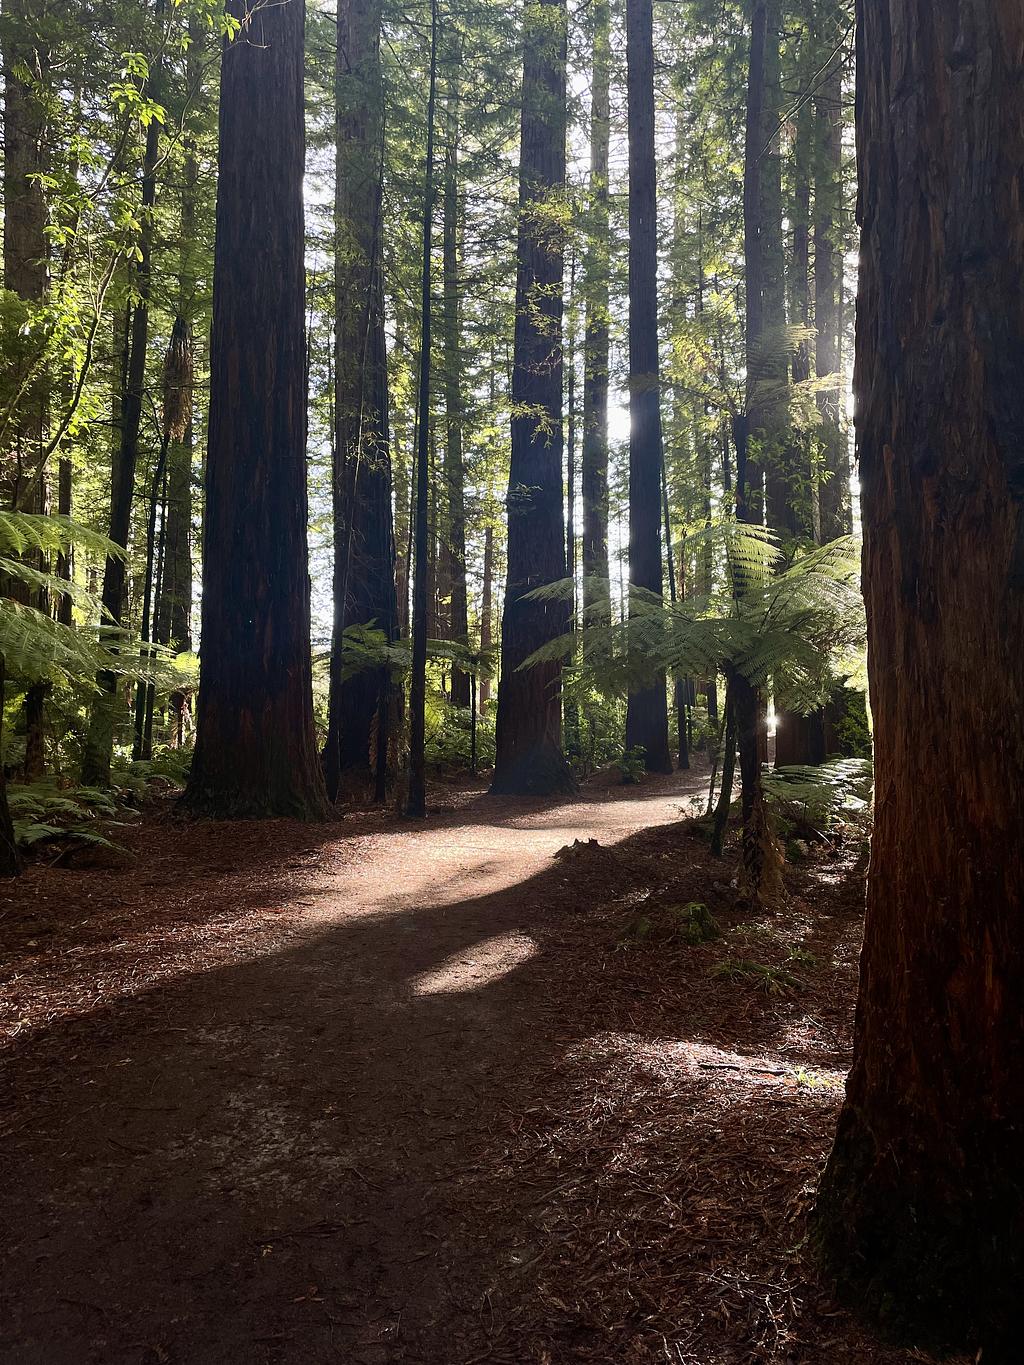 The sun shining through the edges of a redwood forrest